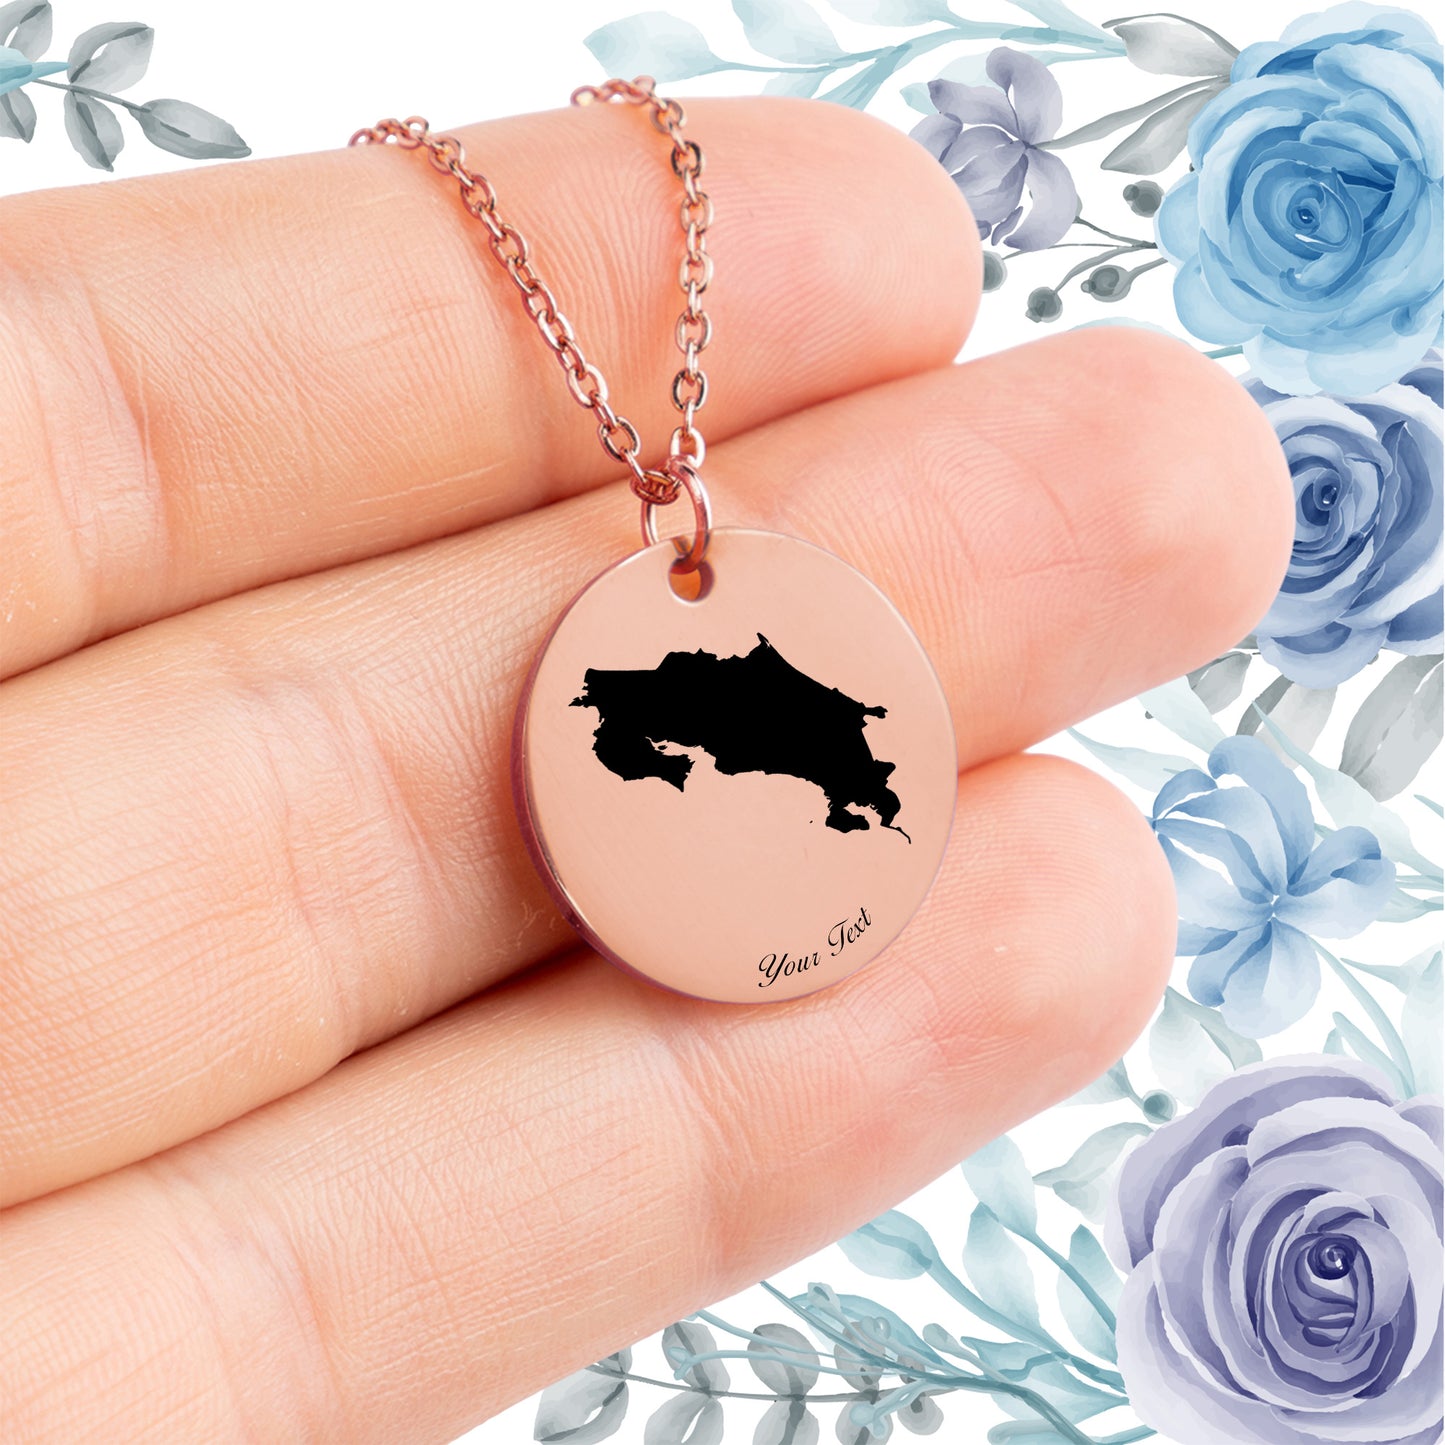 Costa Rica Country Map Necklace - Personalizable Jewelry